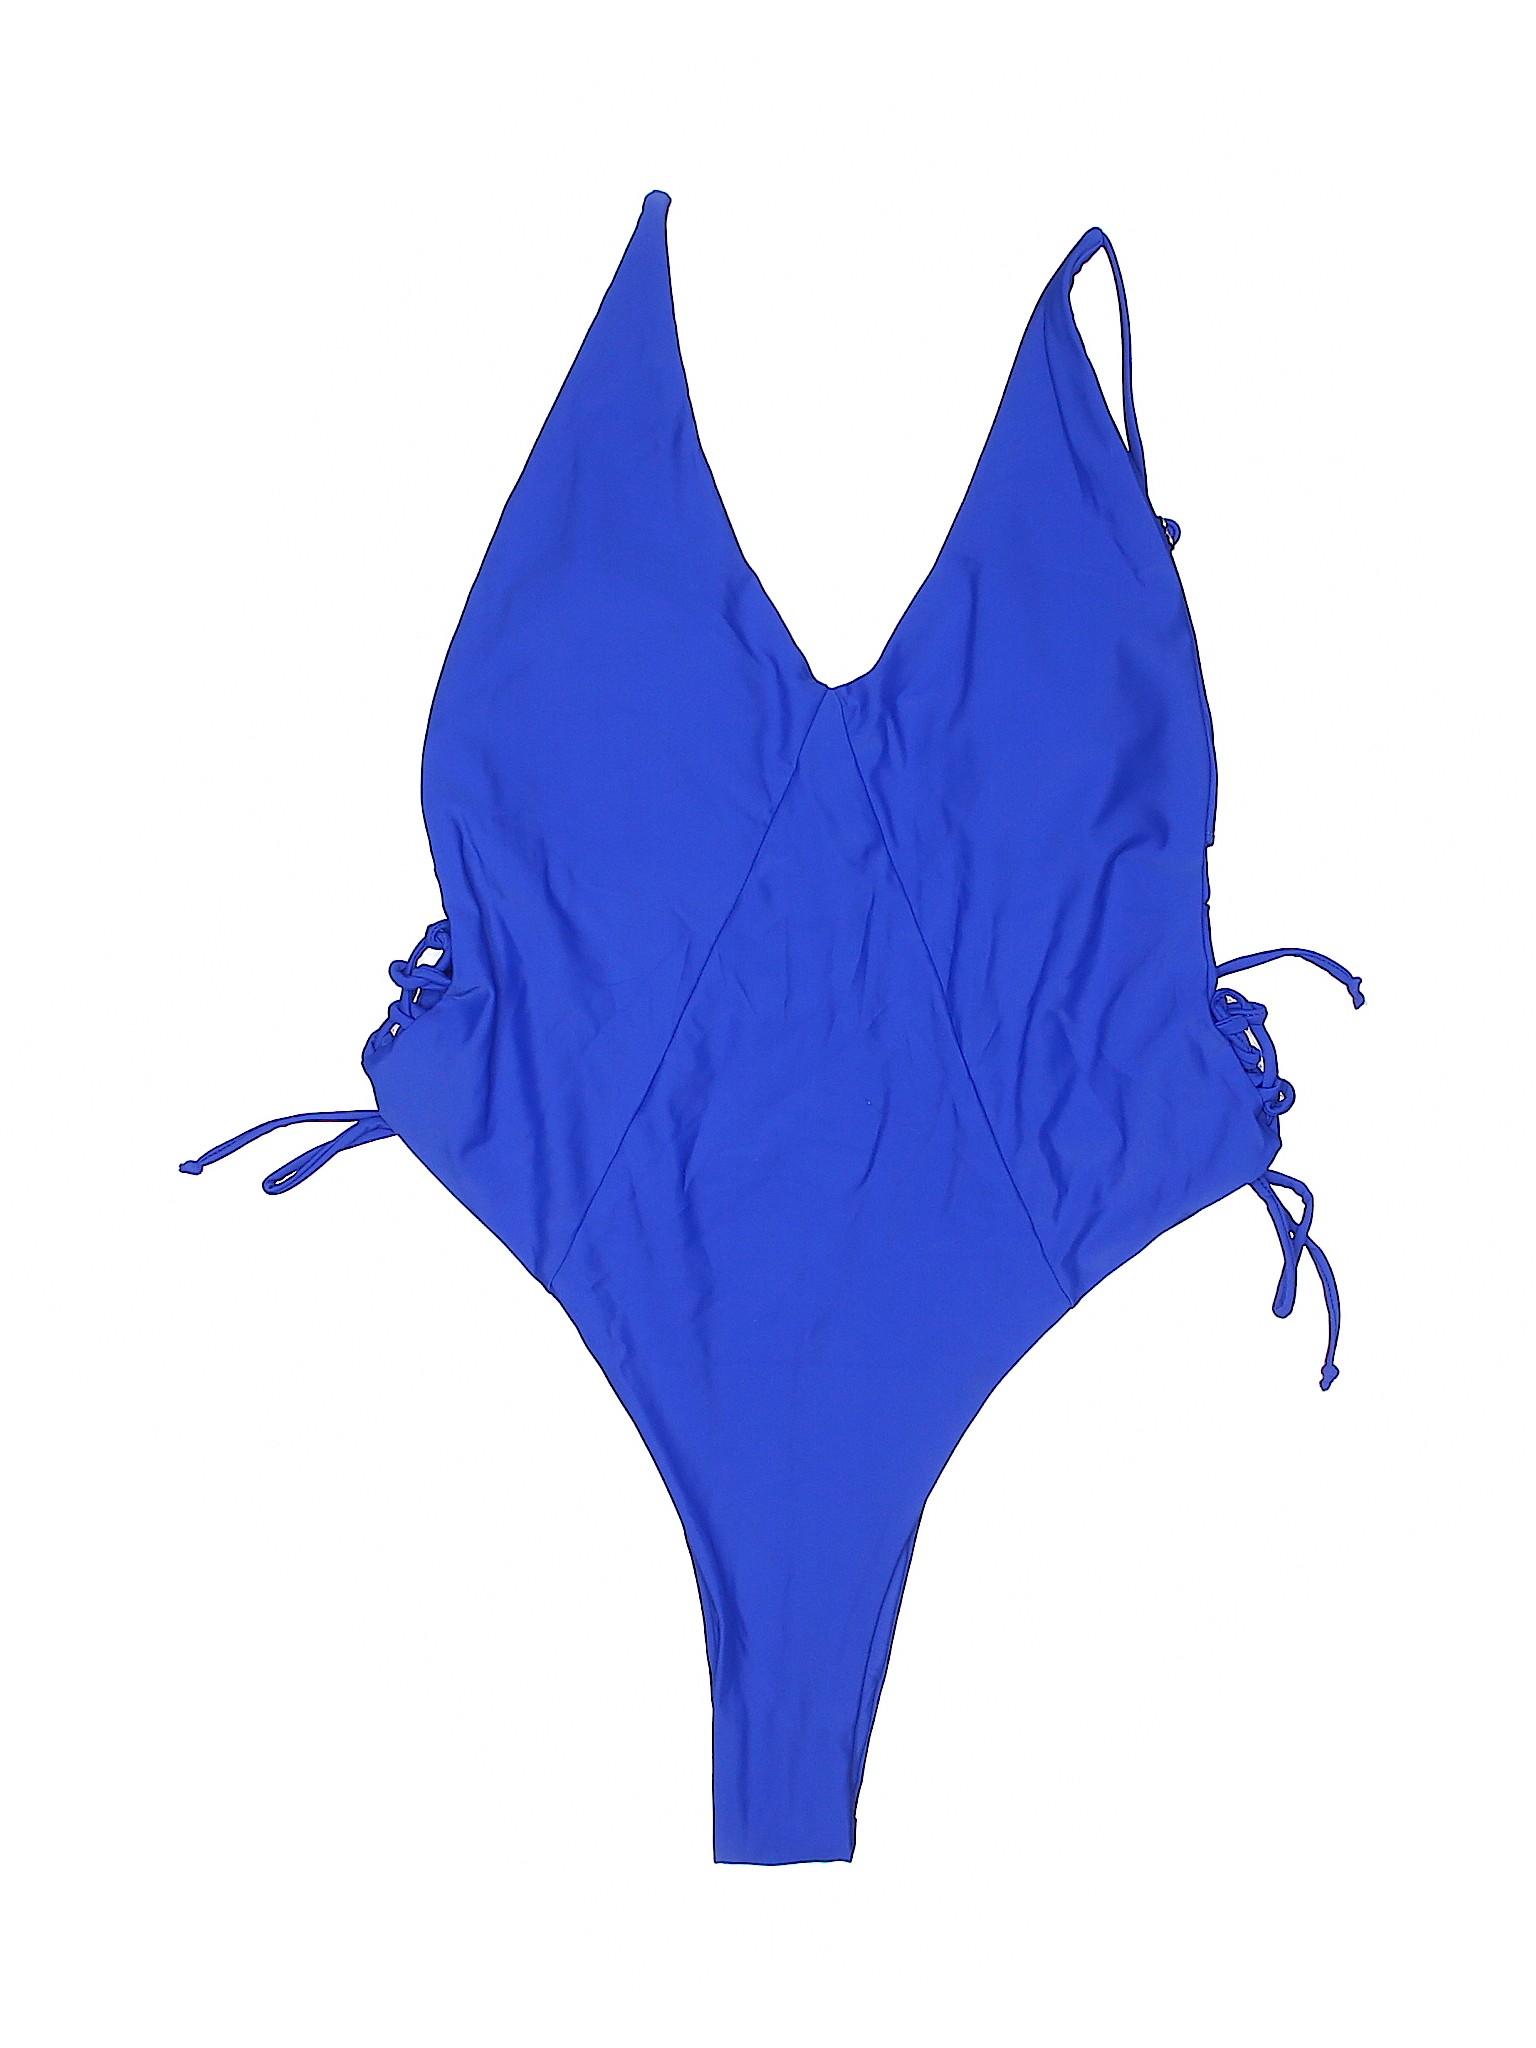 Unbranded Blue One Piece Swimsuit Size L - 58% off | thredUP